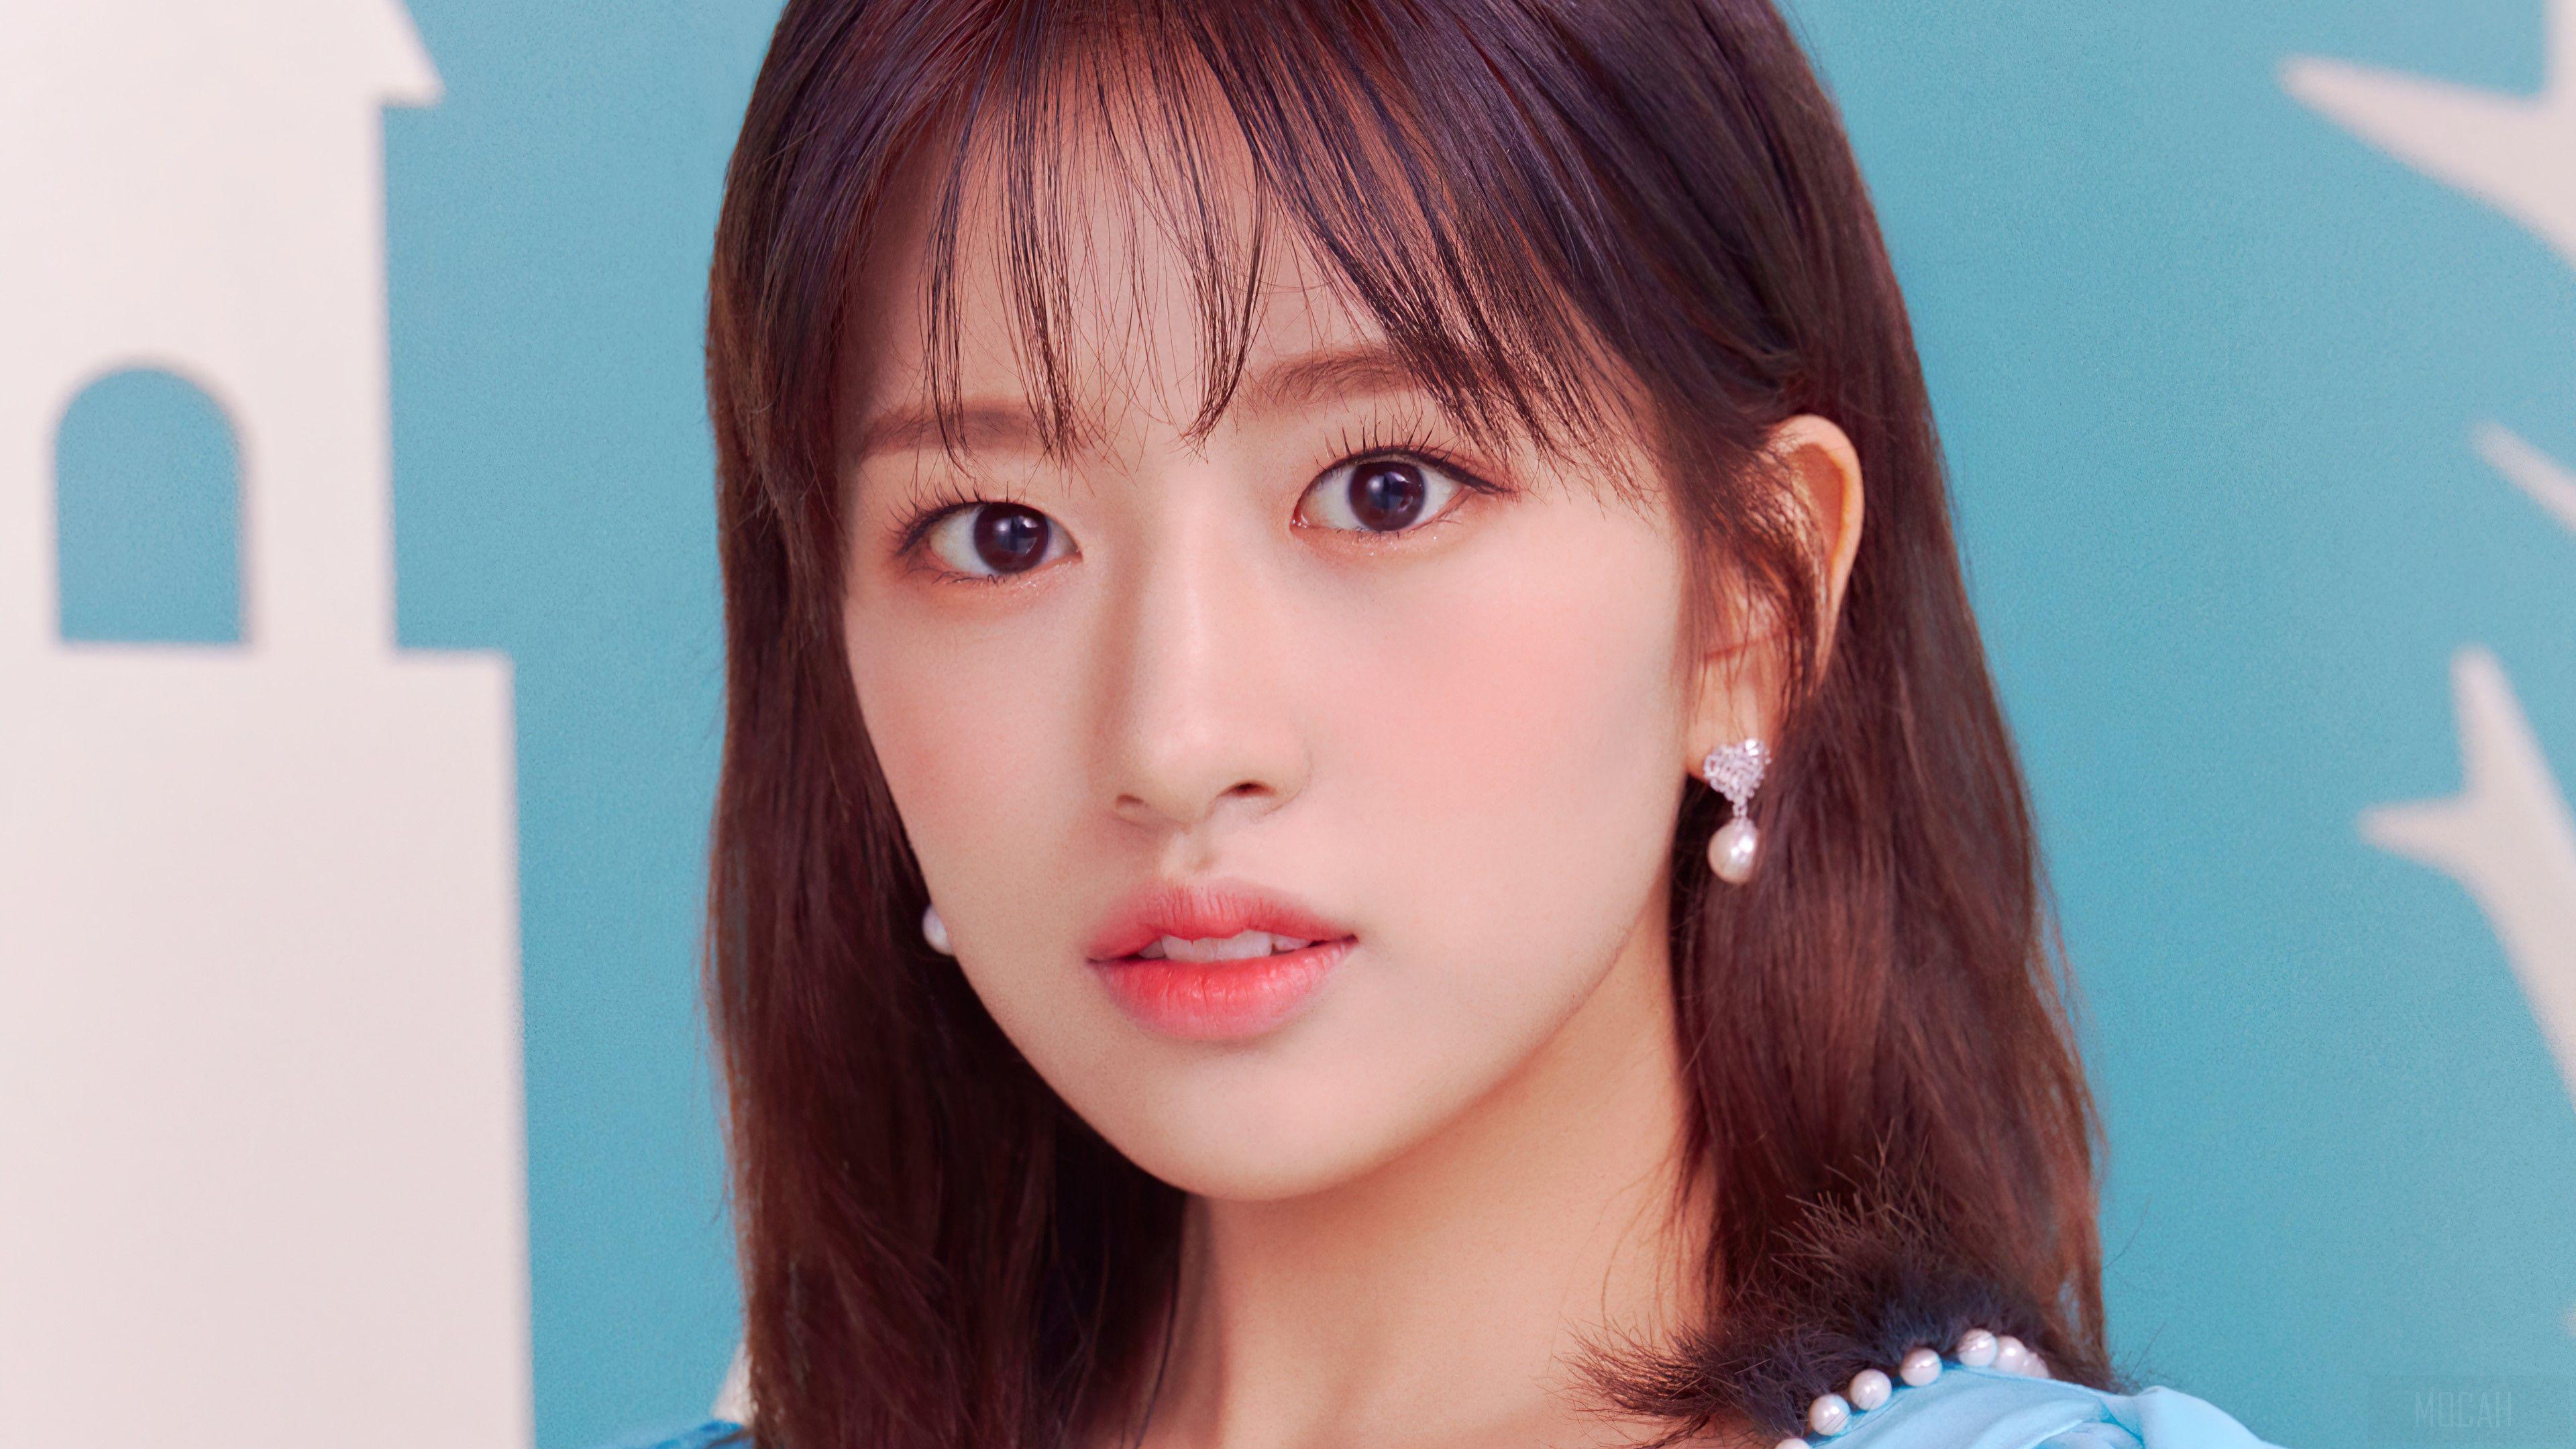 6. Ahn Yujin's Blue Hair: The Story Behind the Color Choice - wide 4